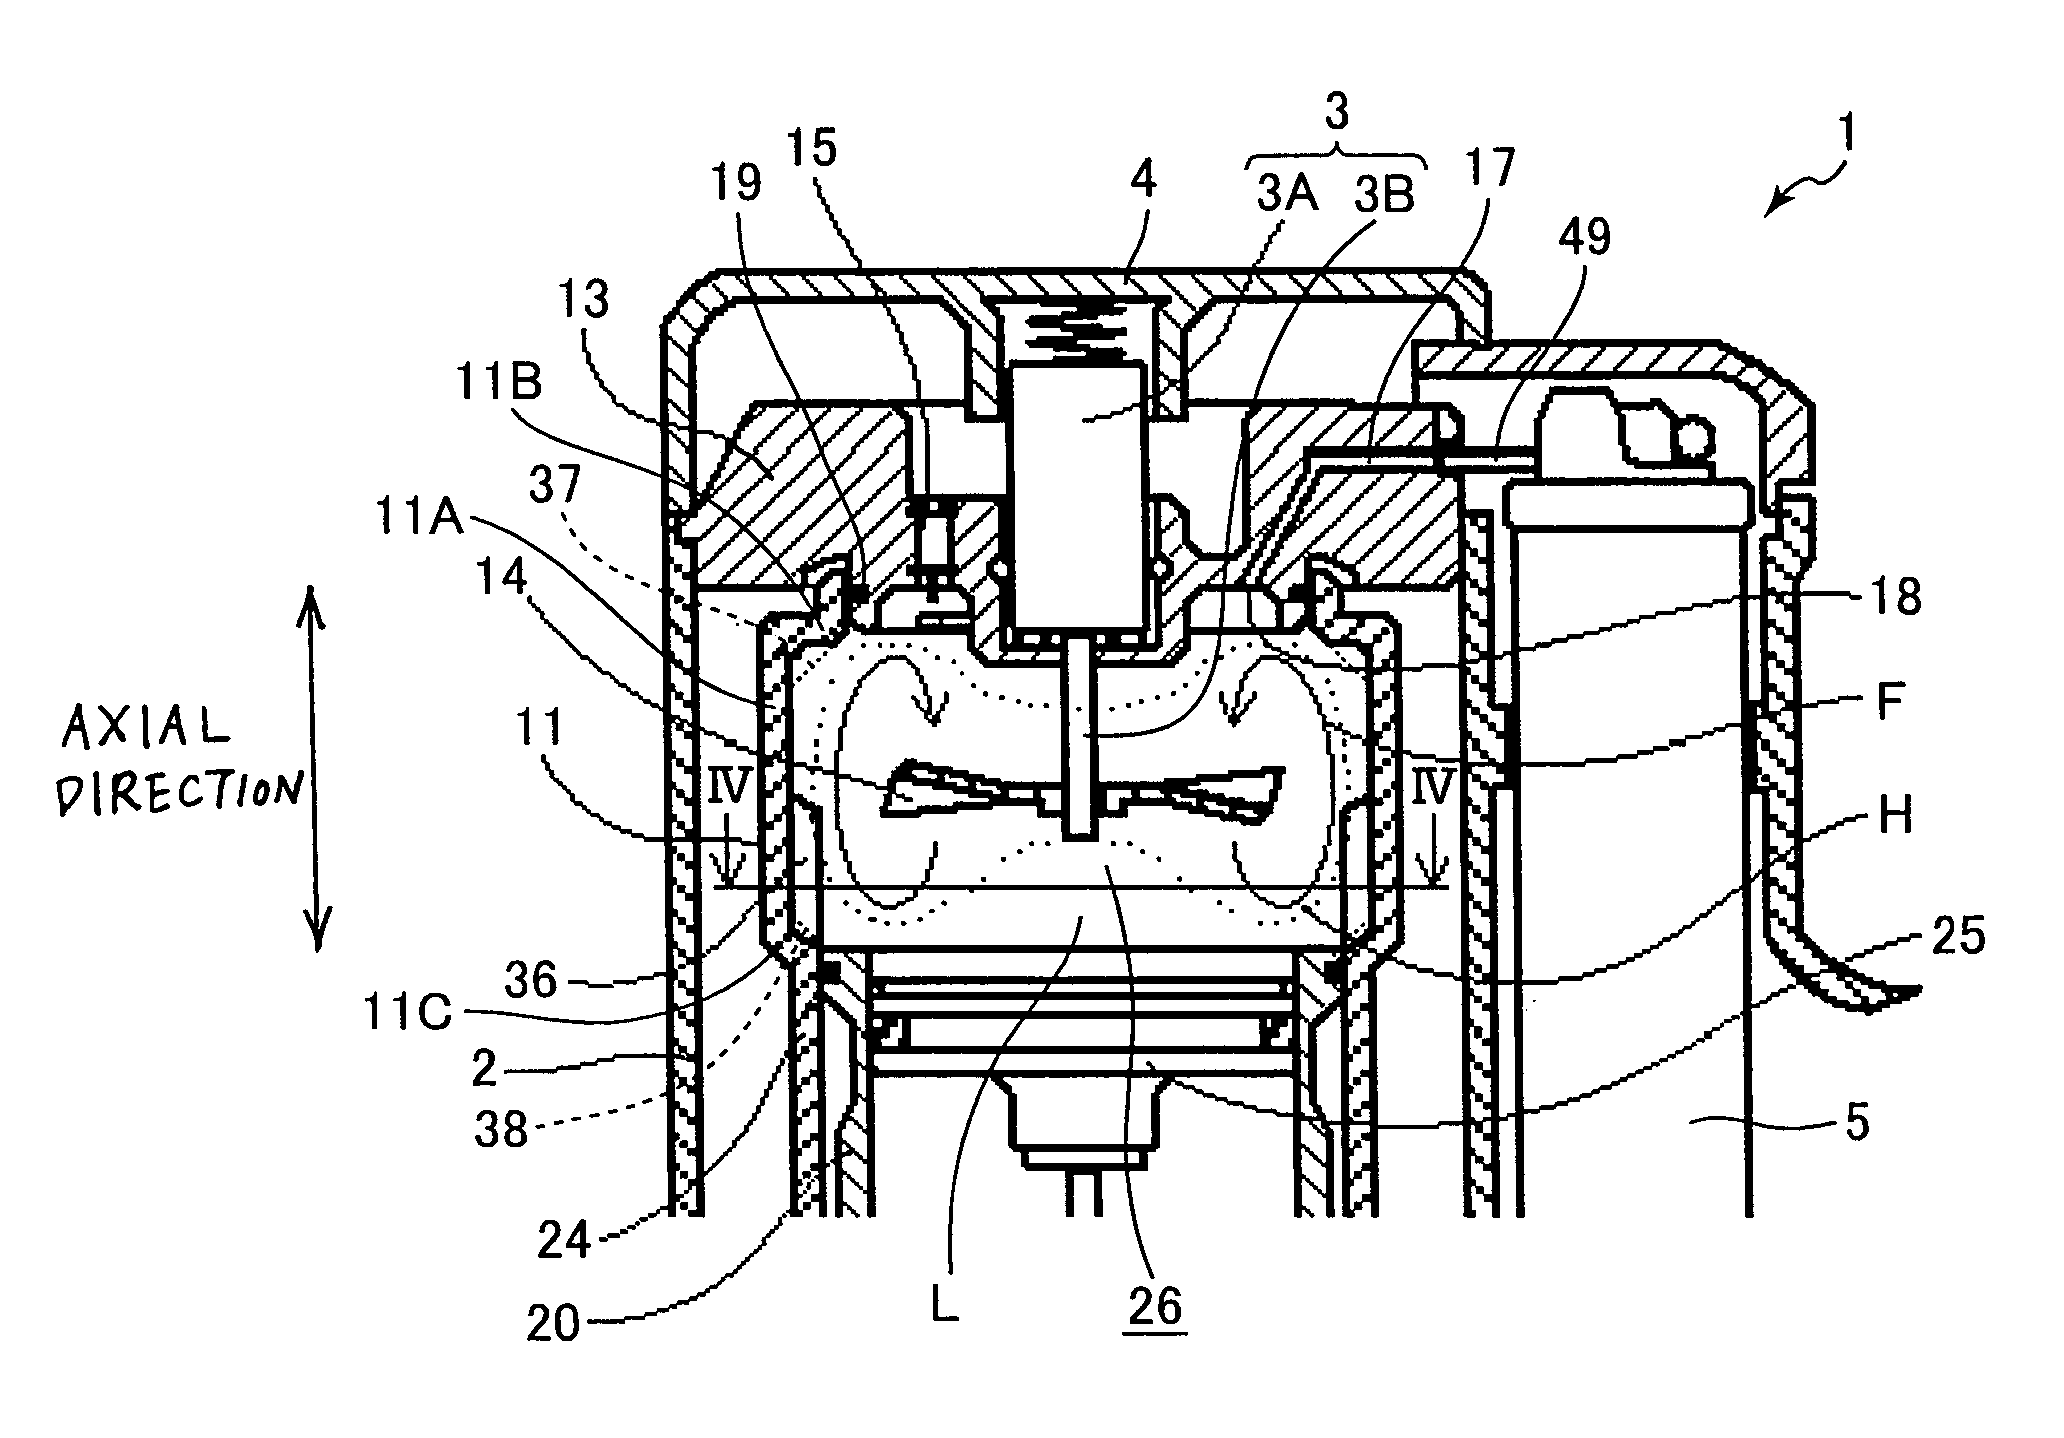 Combustion type power tool having fin in low turbulent combustion region within combustion chamber